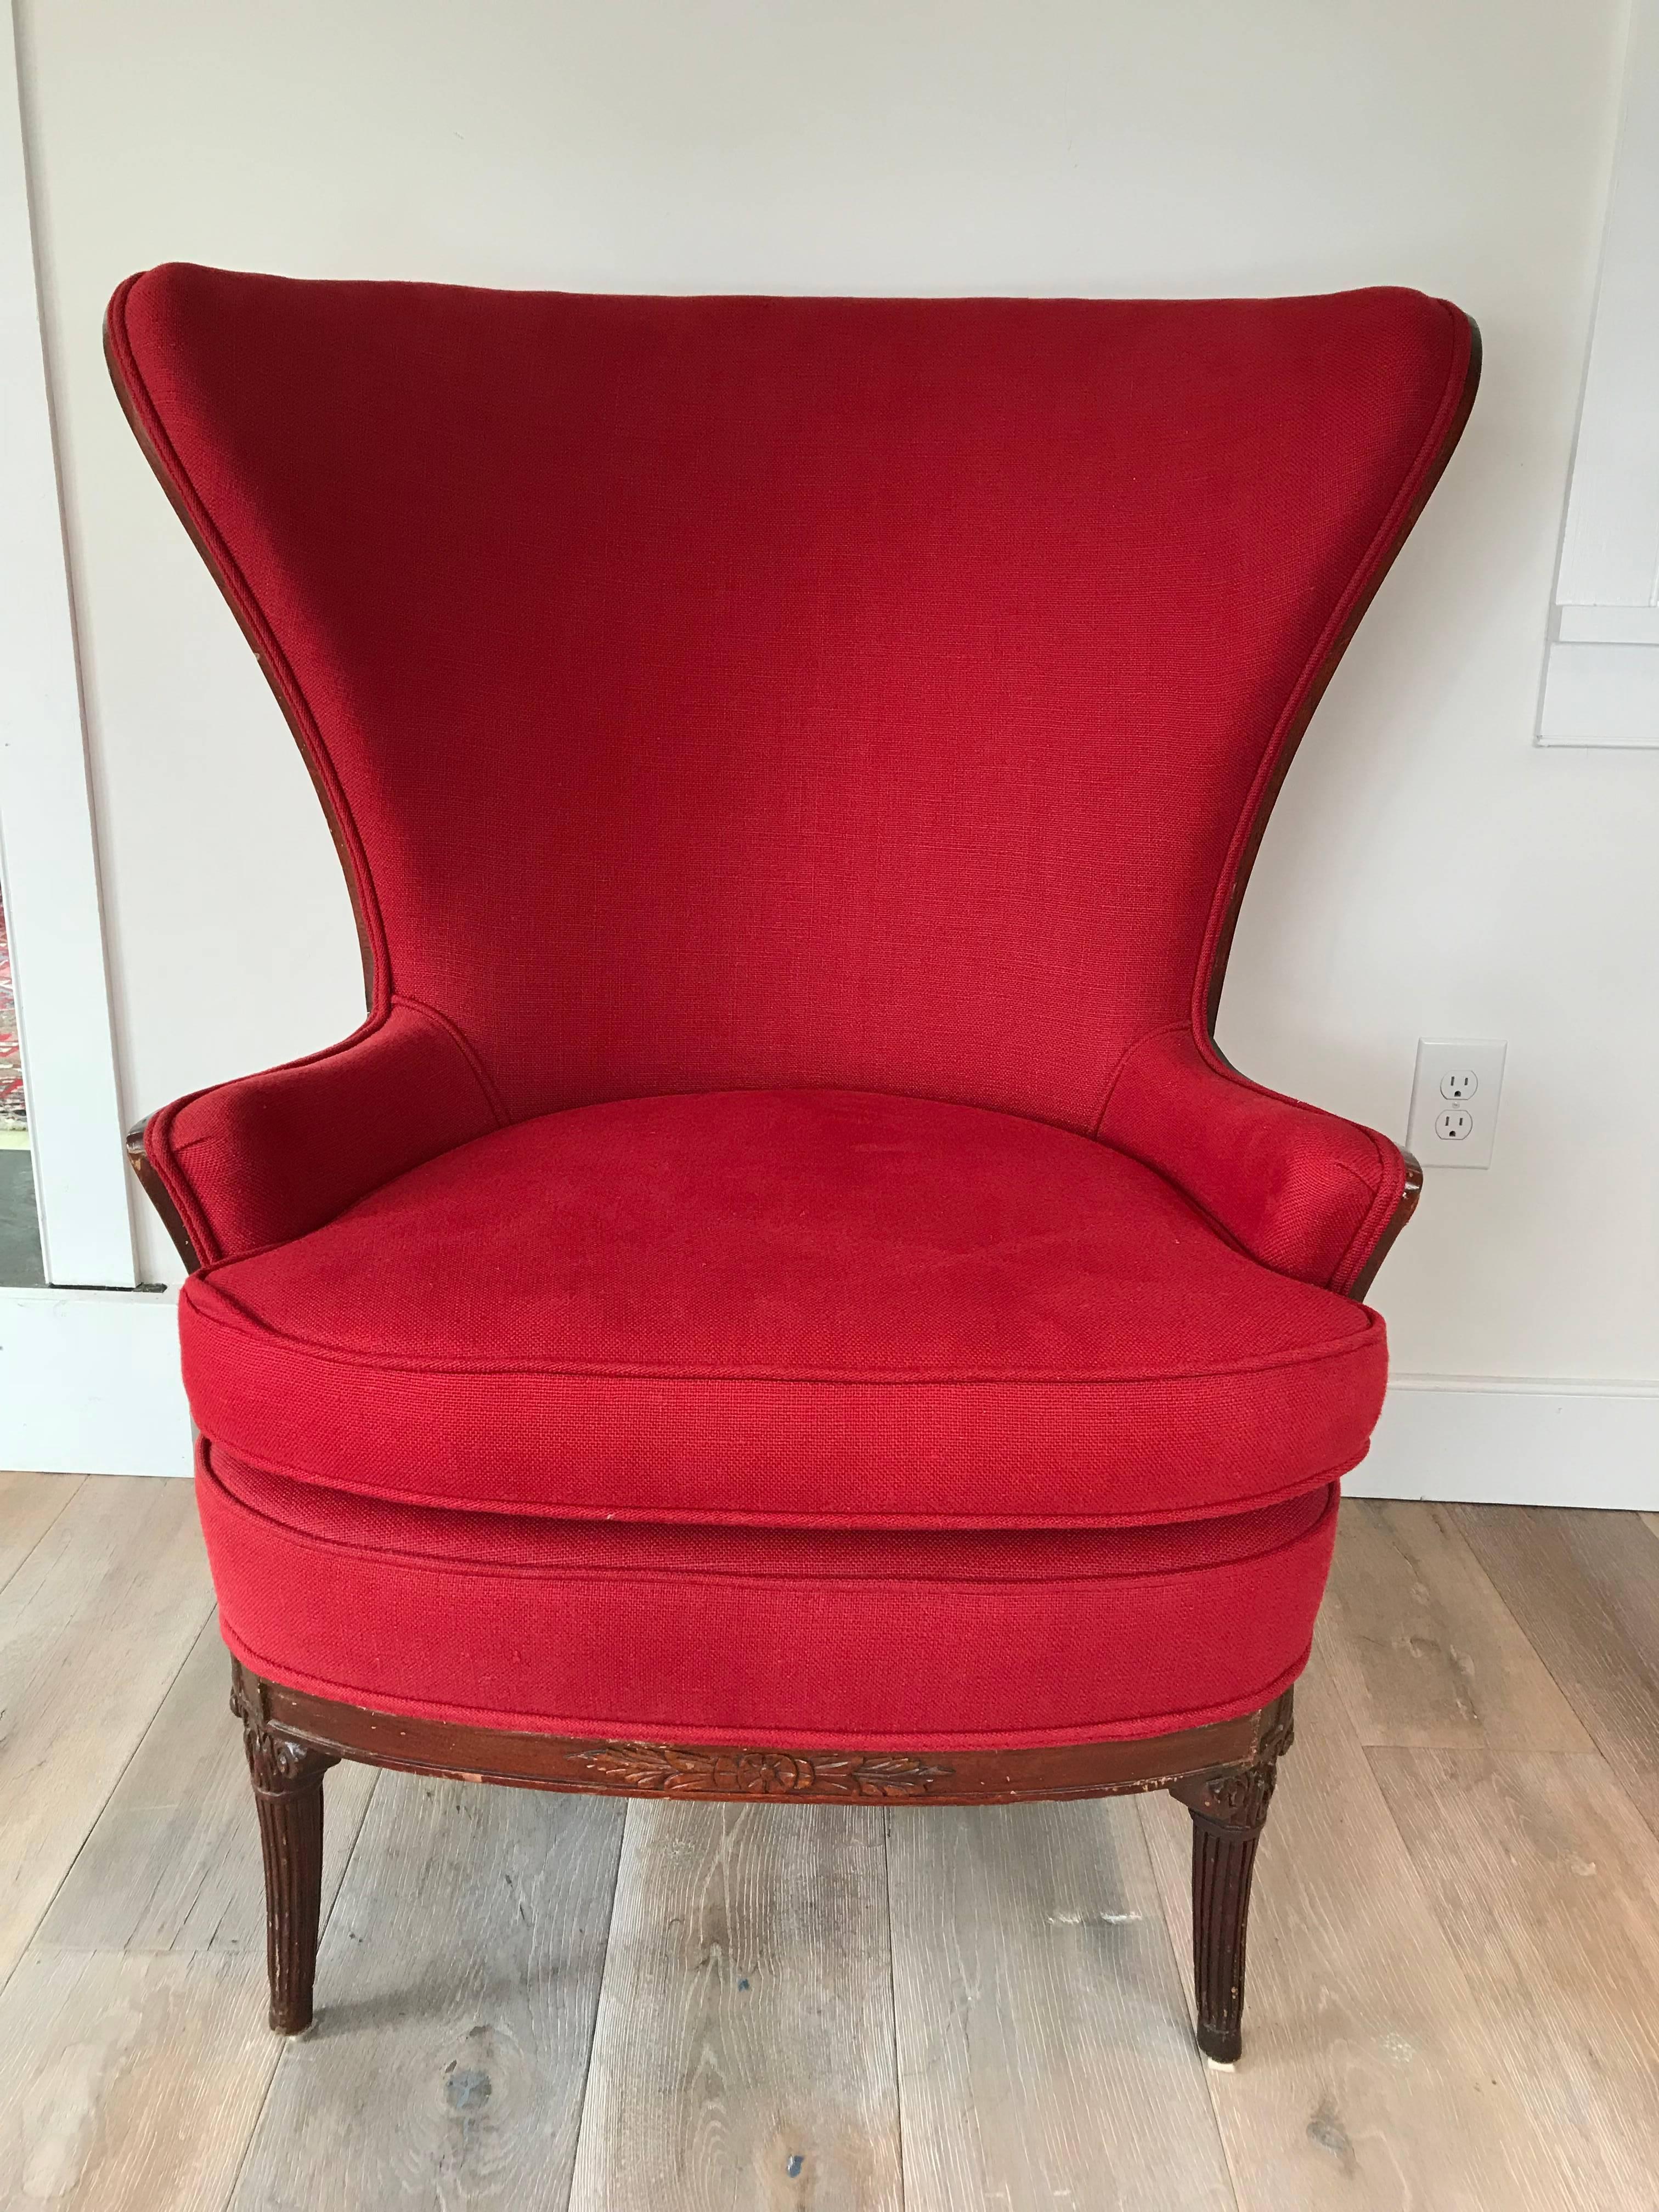 A late 19th century French butterfly wing chair upholstered in red cotton canvas.